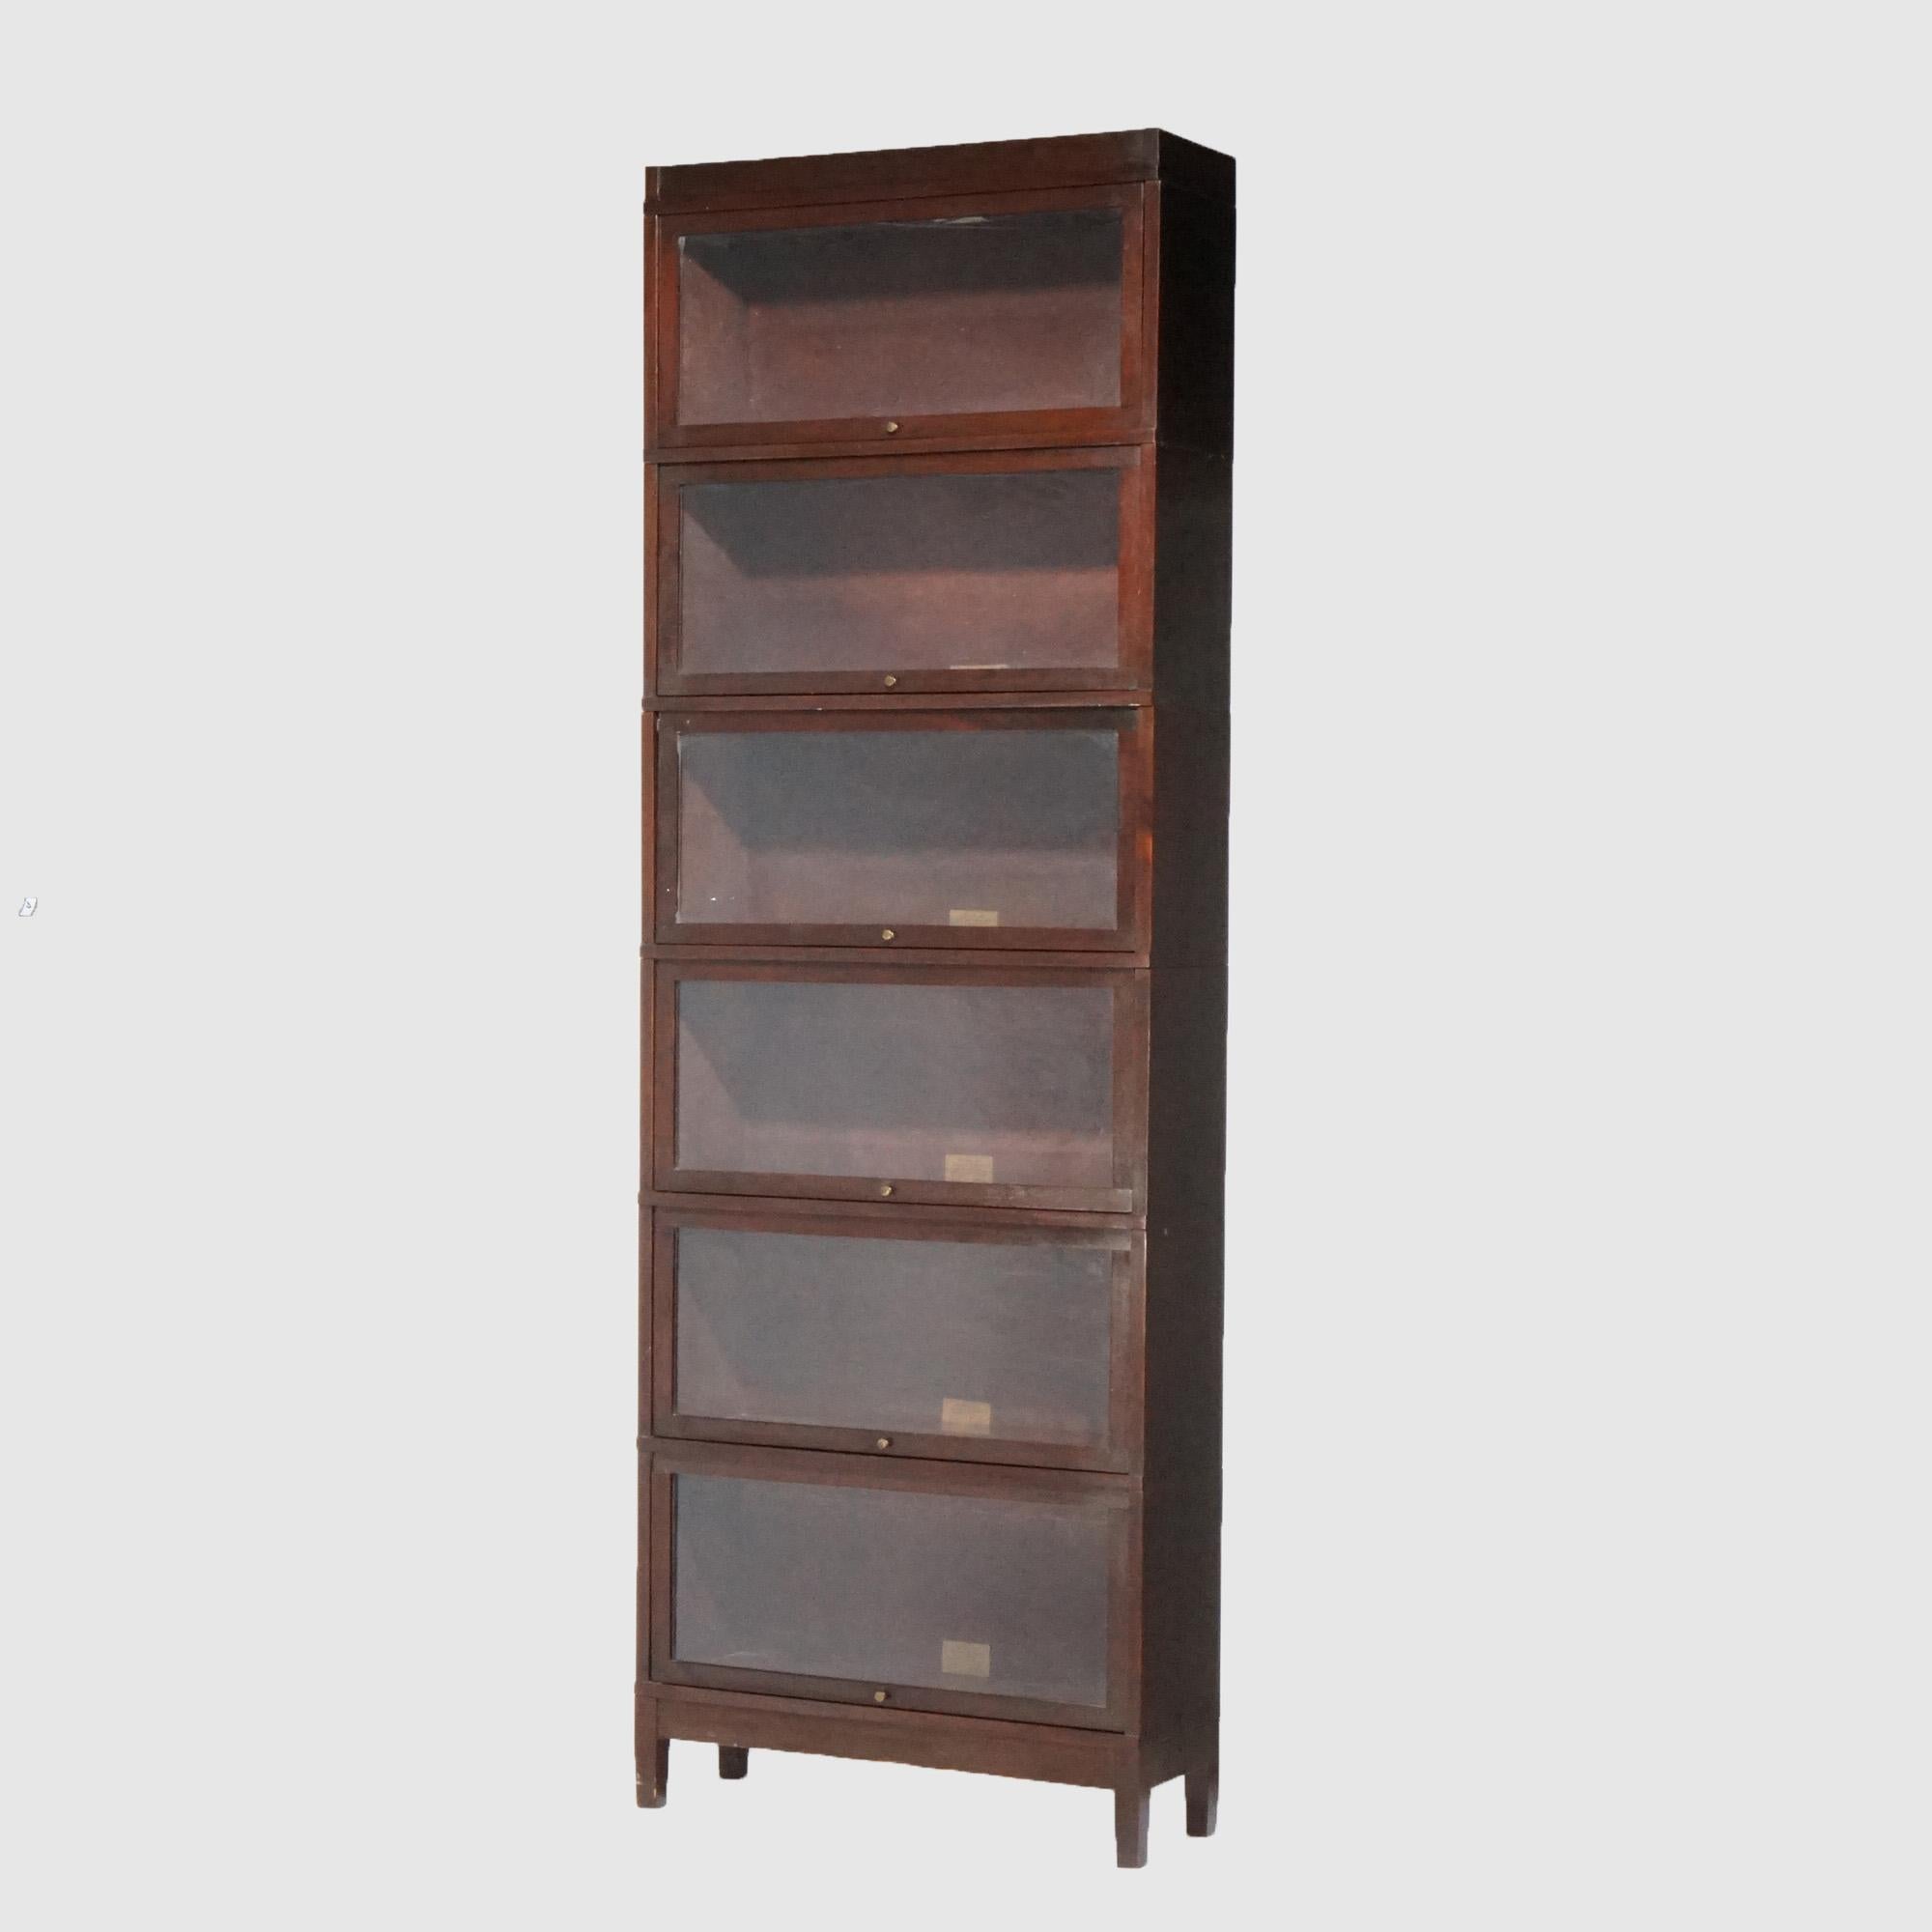 An antique Arts and Crafts barrister bookcase by Globe Wernicke offers mahogany construction with six stacks, each having pull-out glass doors and raised on square and straight legs; makers labels as photographed; c1910

Measures - 100.5